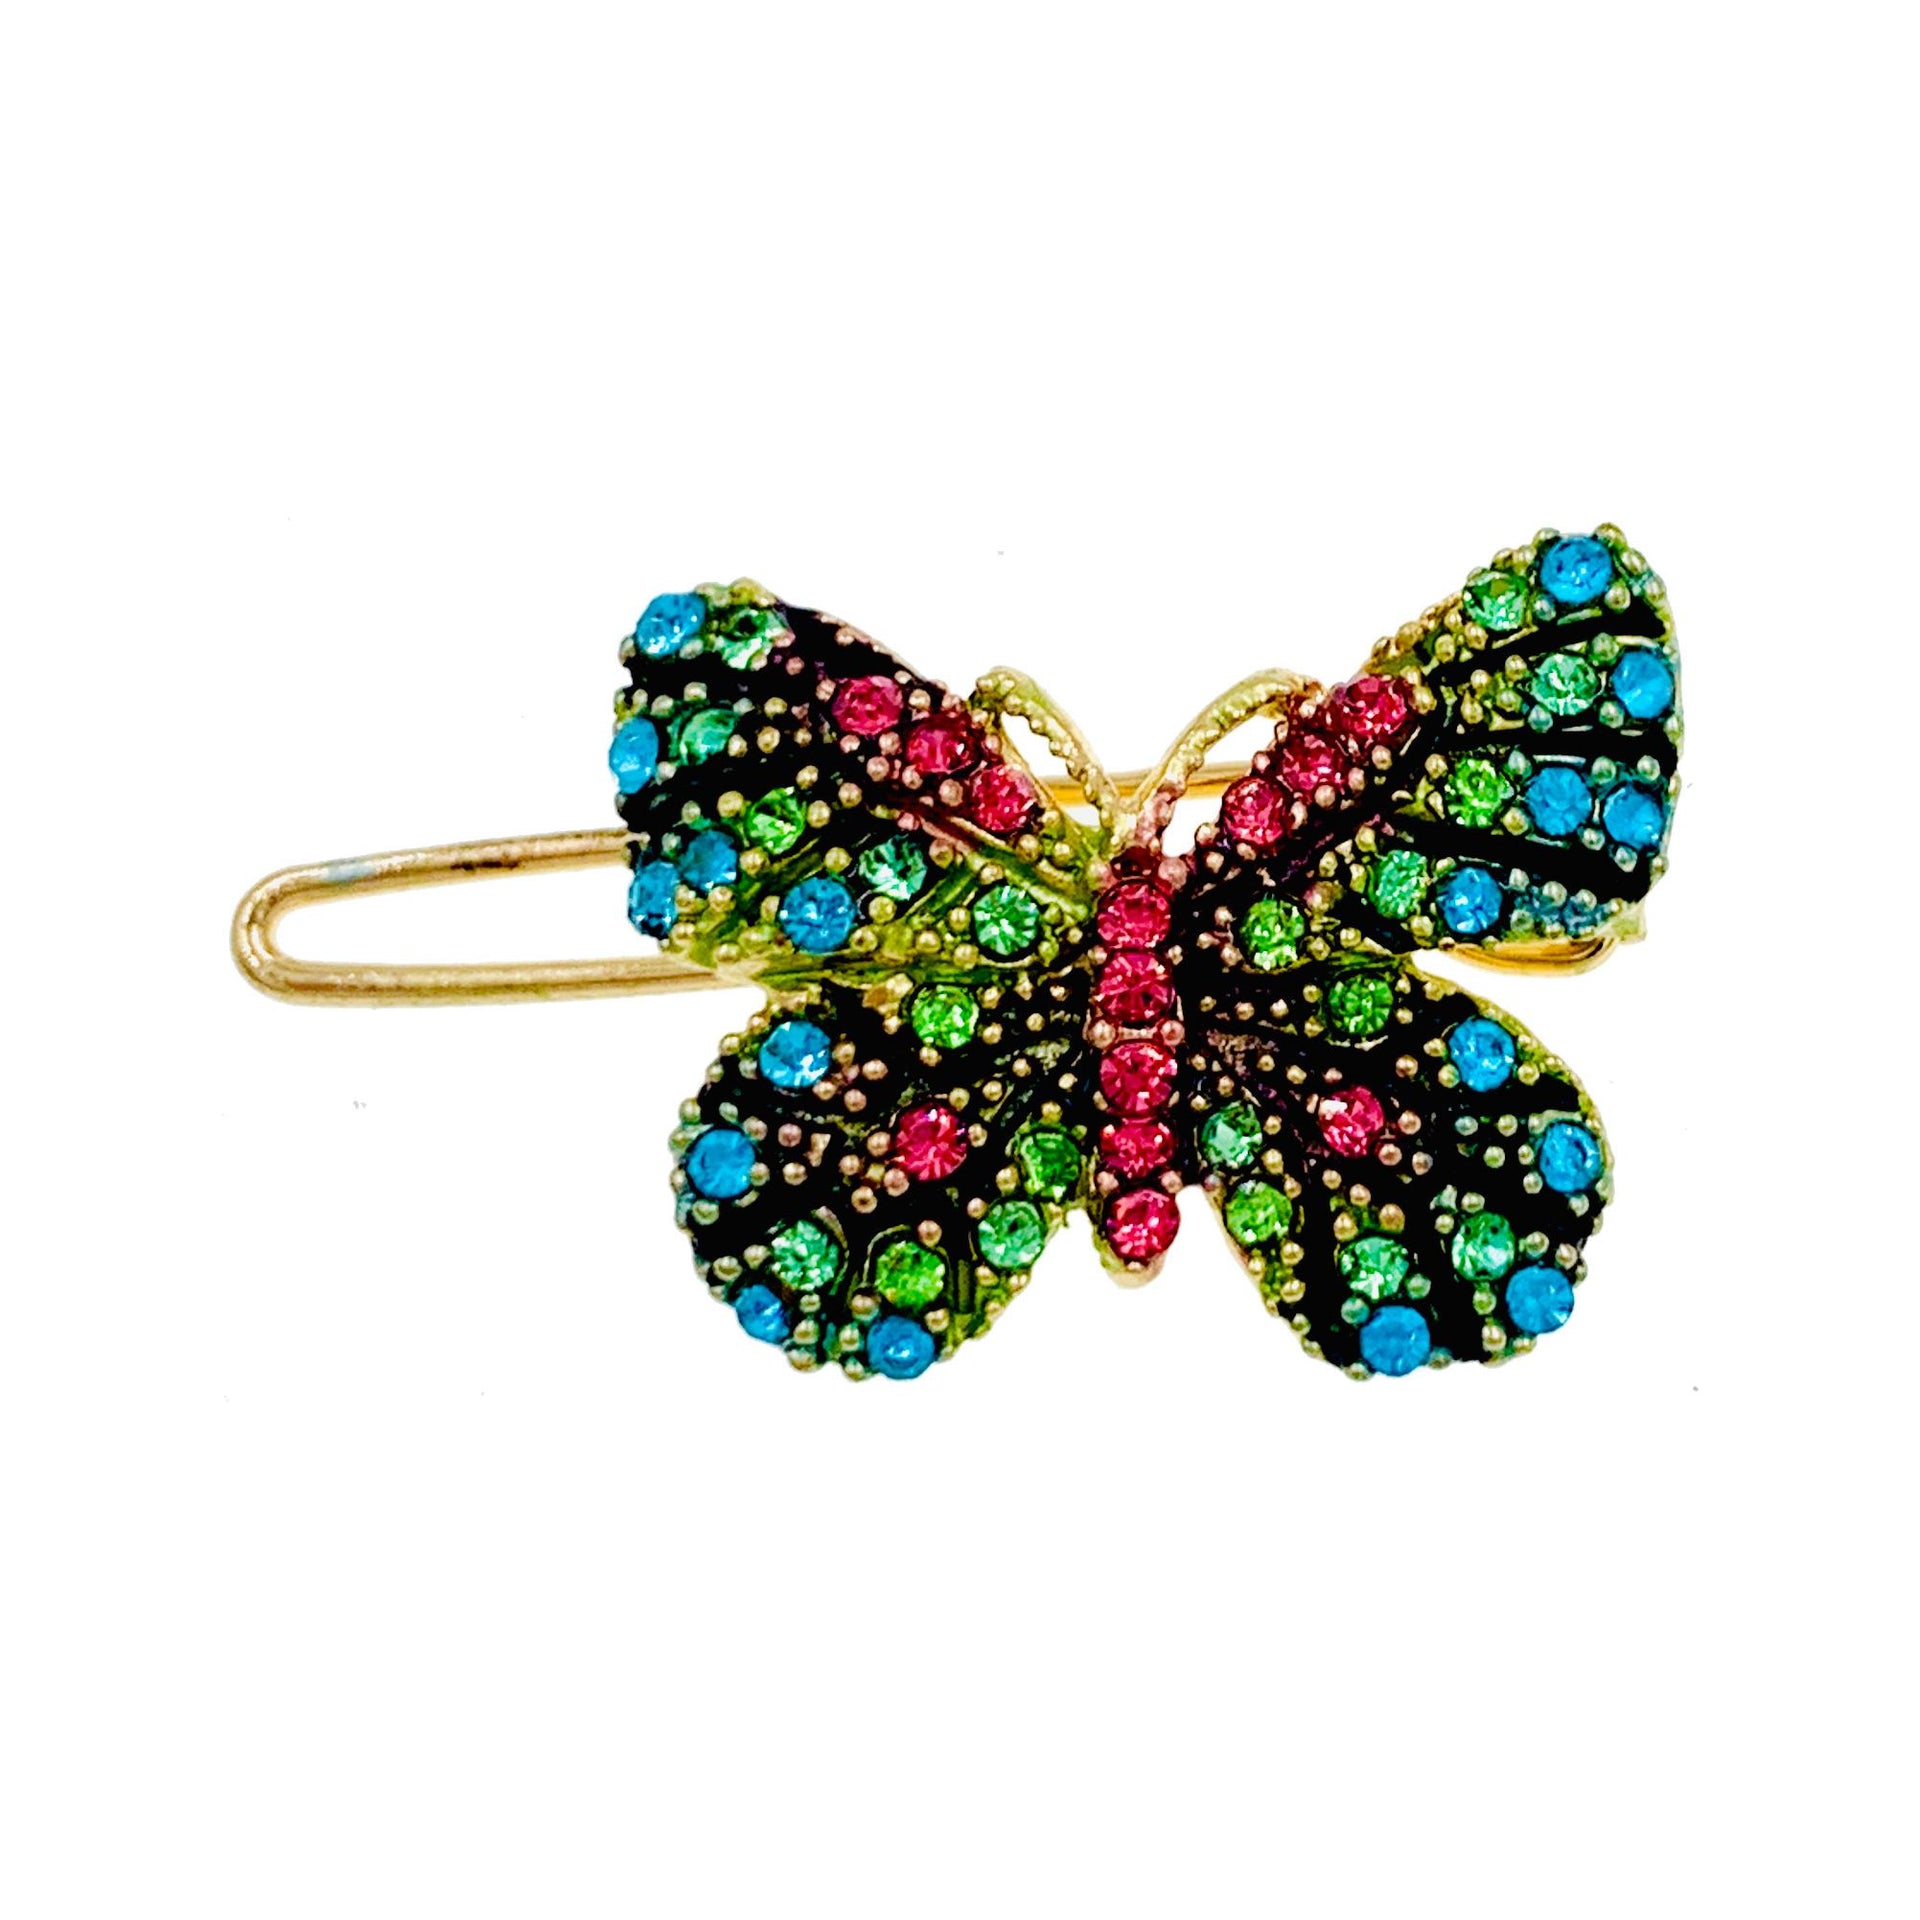 Fairy Handmade Small Butterfly Hair Clip use Swarovski Elementary Crystal Pink Blue Gold Brown Yellow Green Purple Black White, Hair Clip - MOGHANT